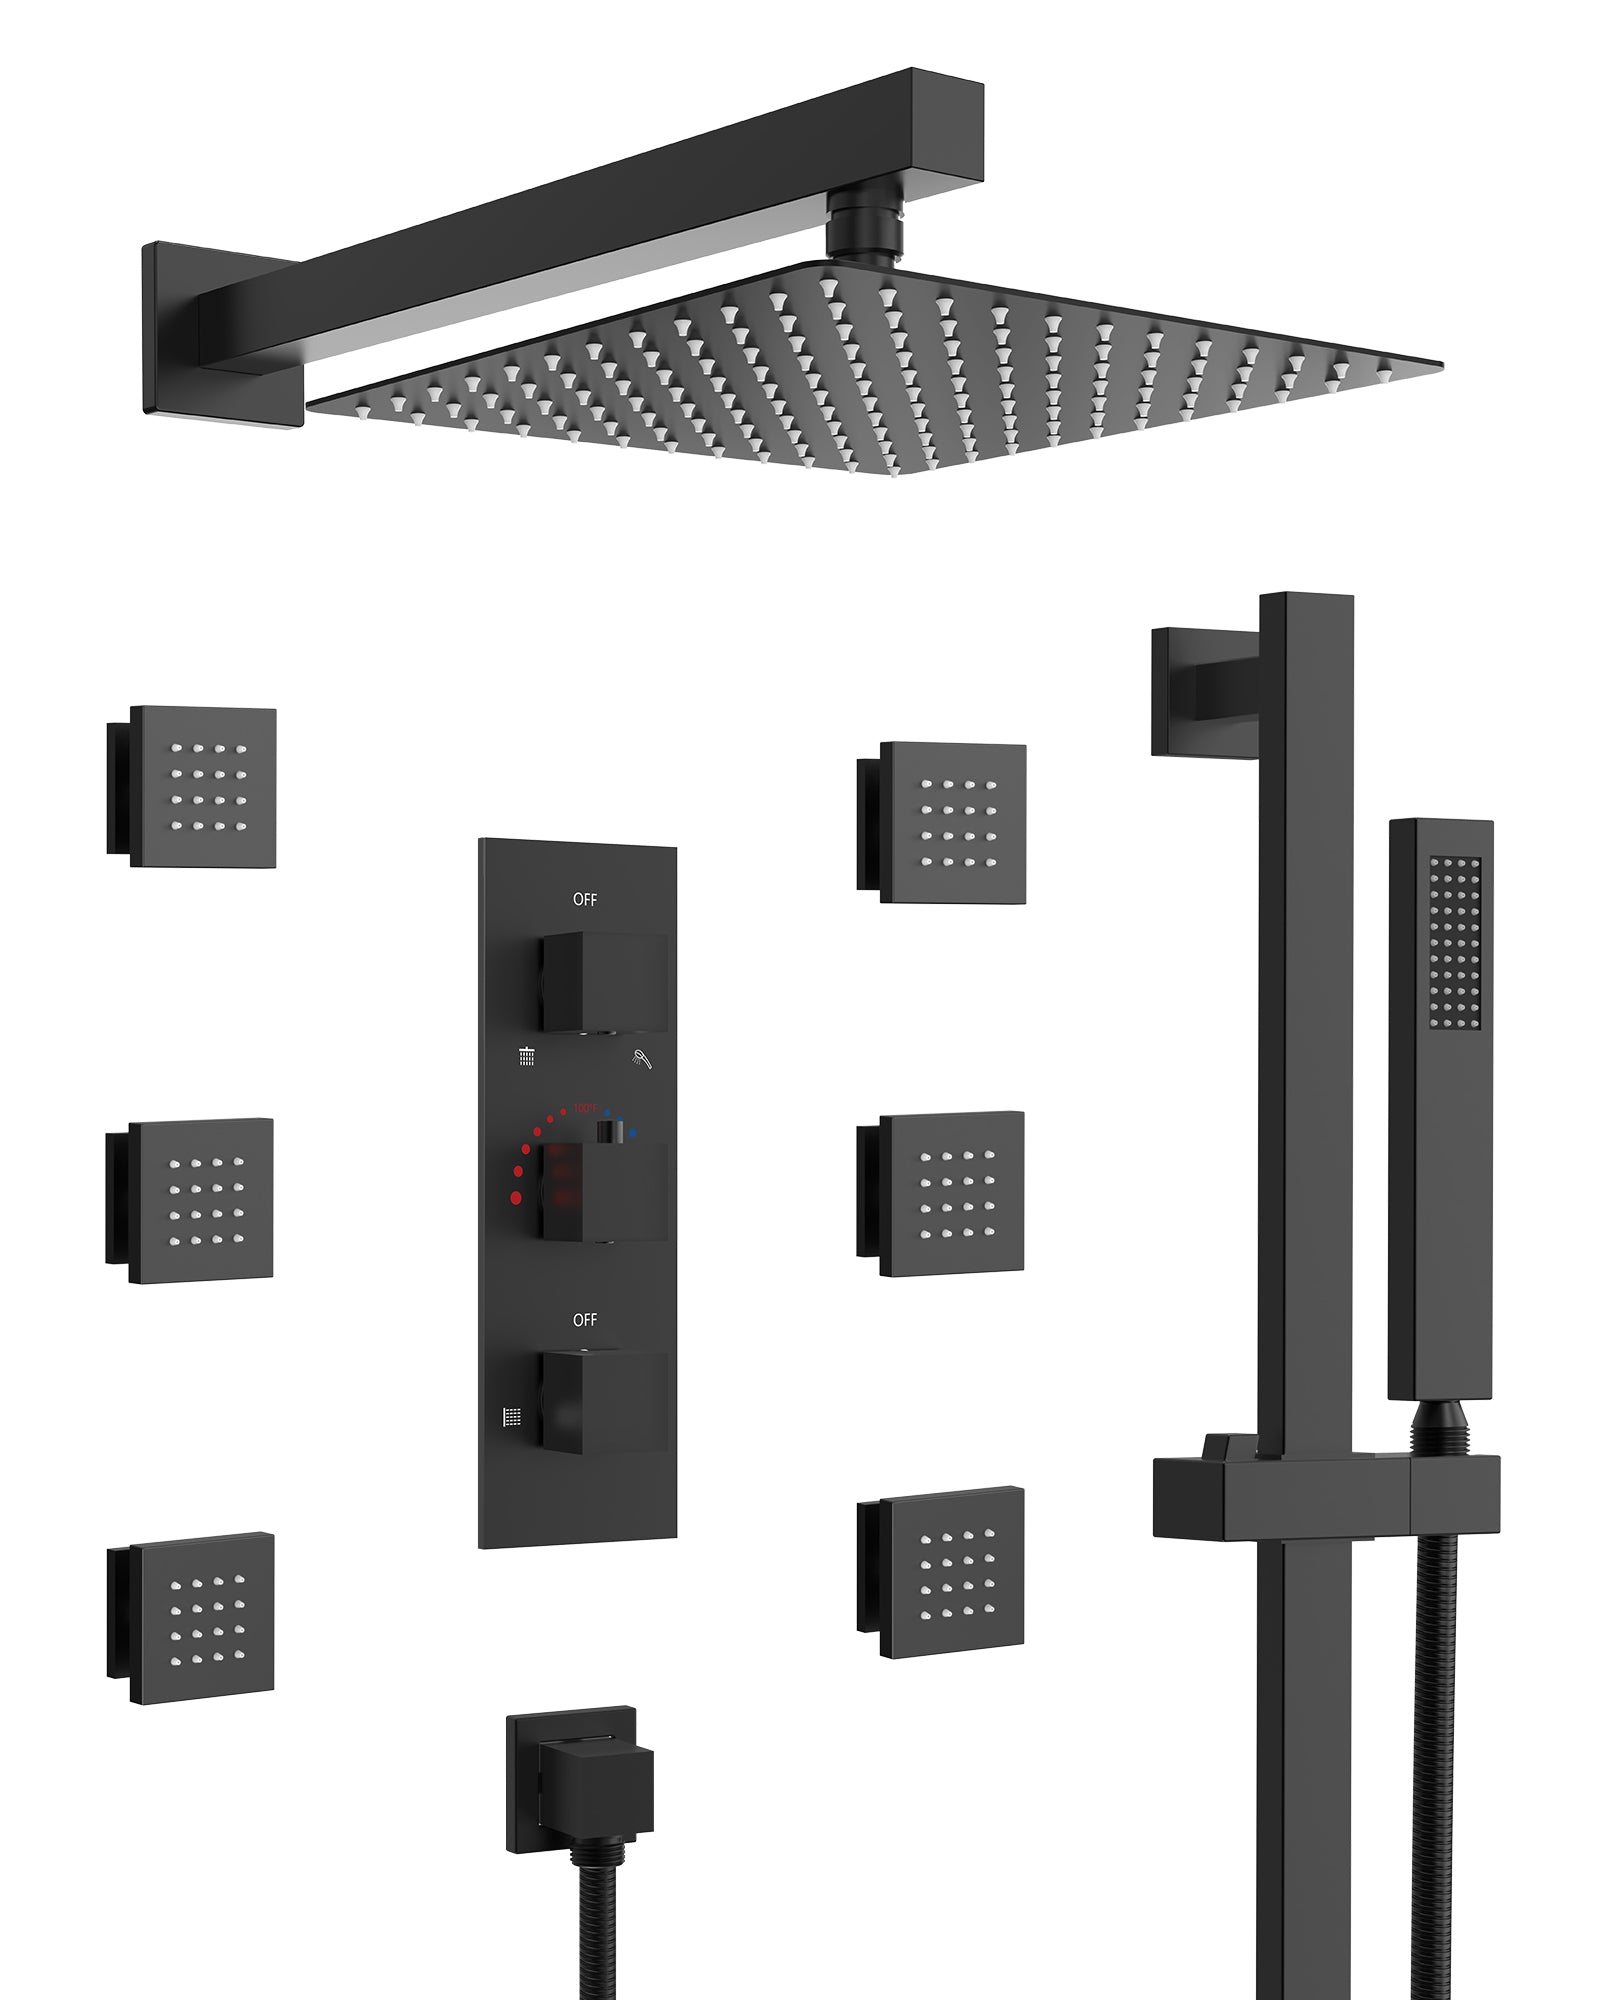 SFS-1016-BK12 EVERSTEIN Luxury wall mounted shower faucet system with fixed device and rough valve, with 6 body massage spray and hand-held shower faucet in Matte Black